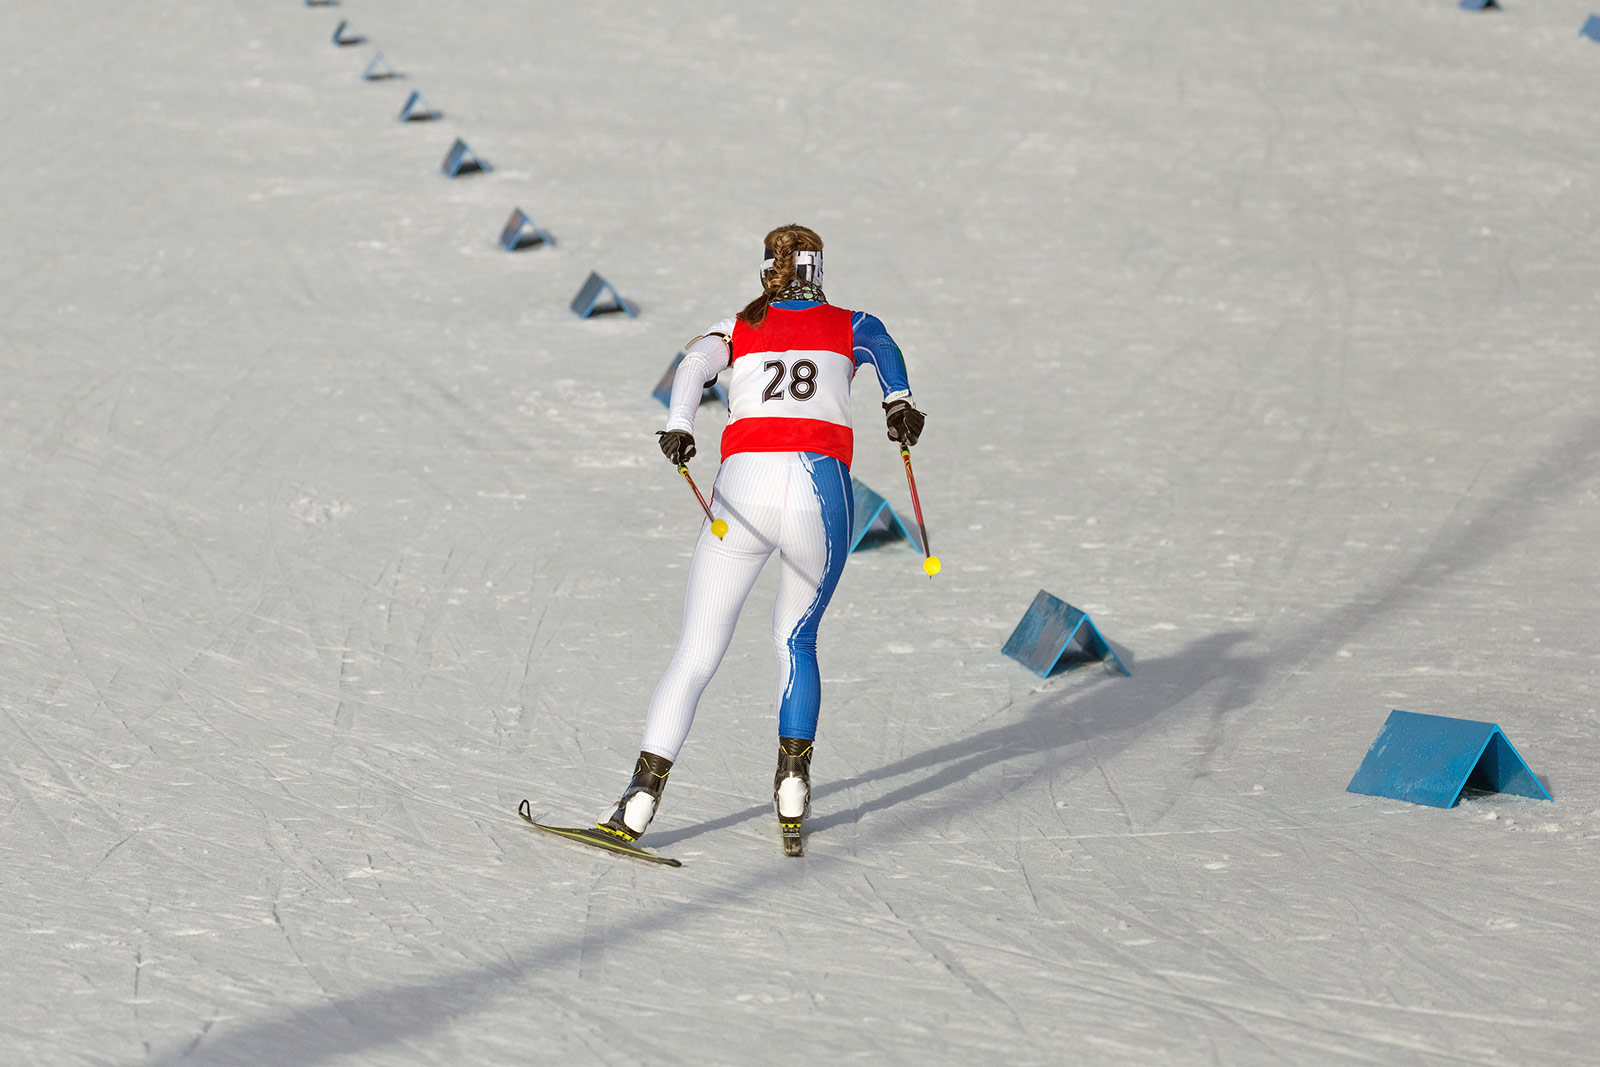 An elite-level cross country skier